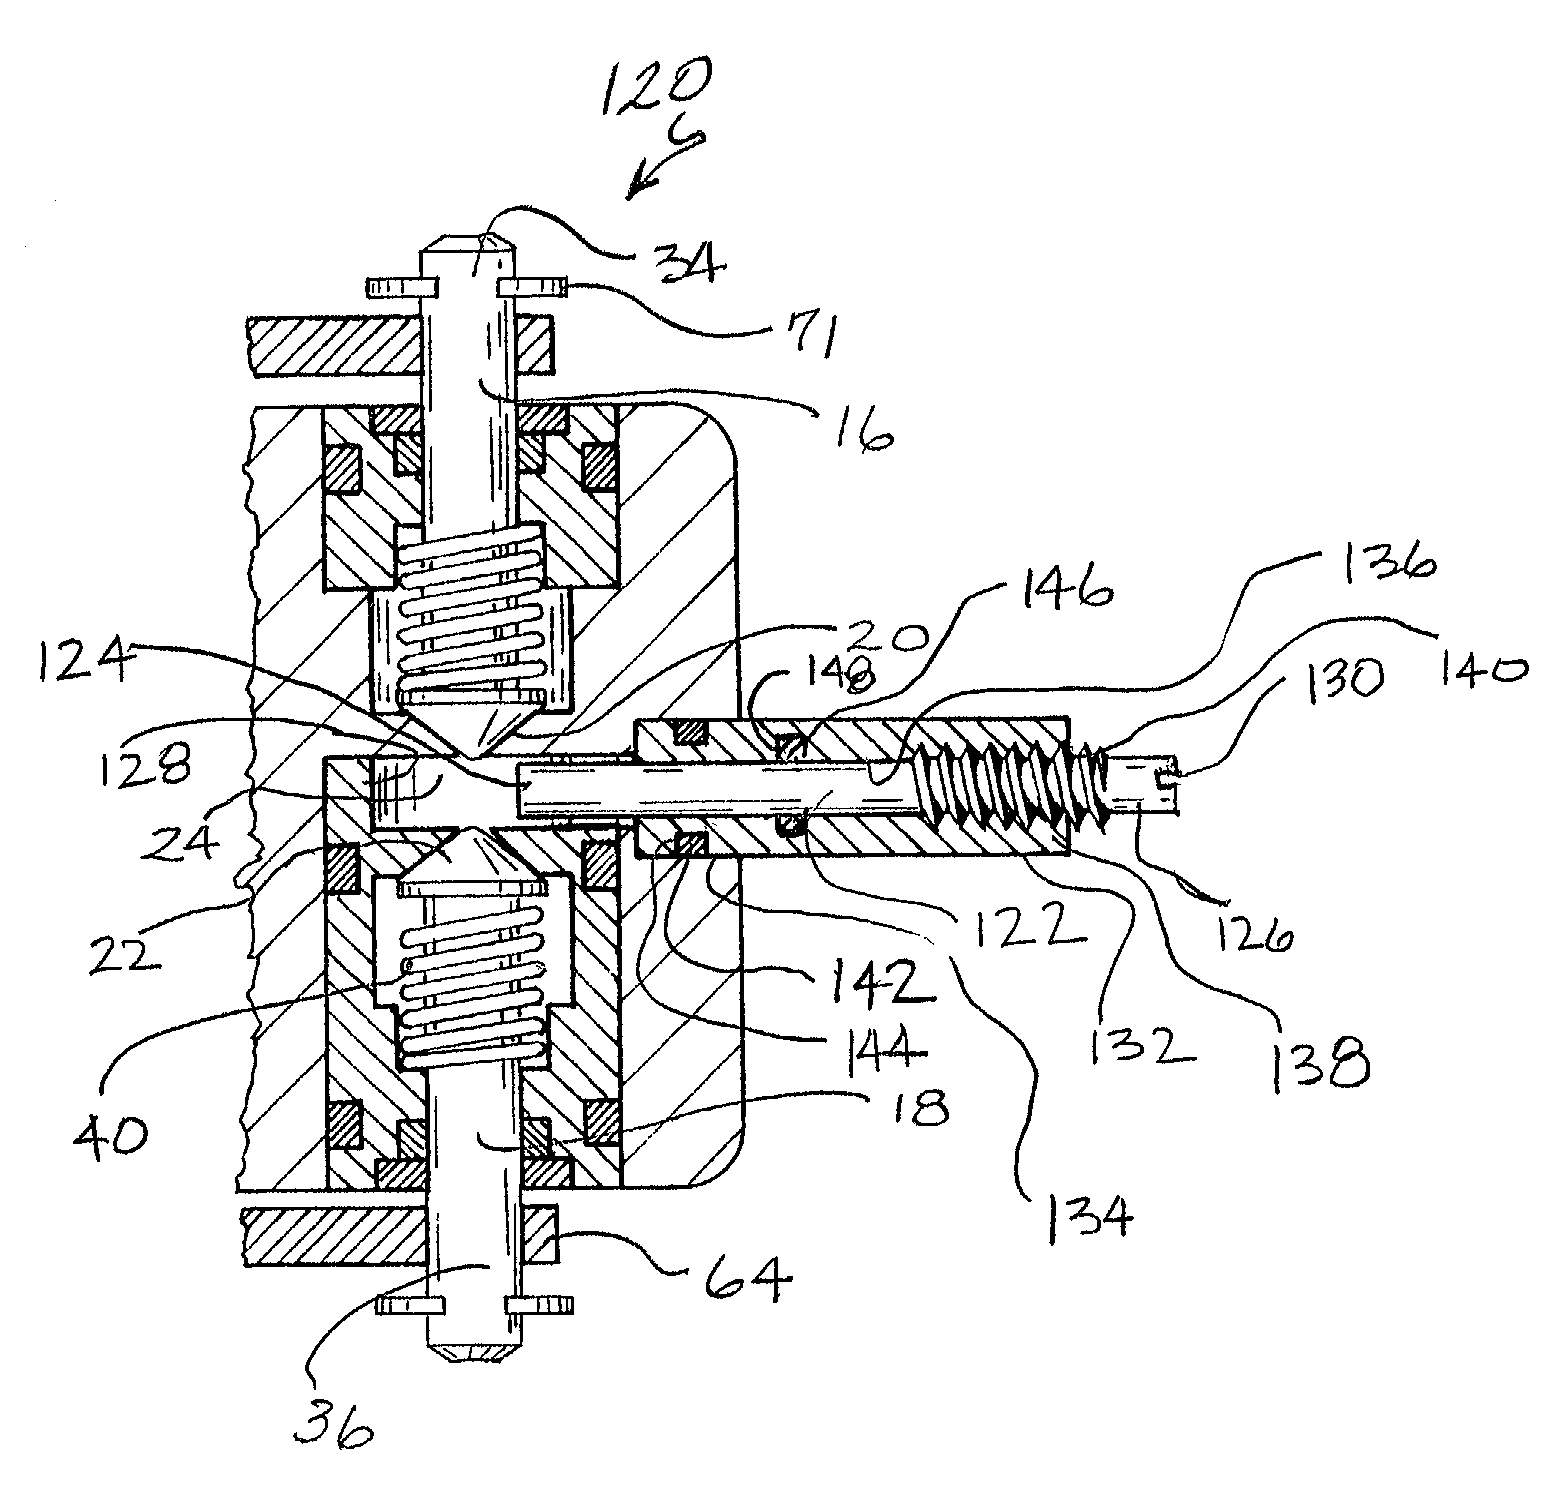 Variable volume valve for a combustion powered tool